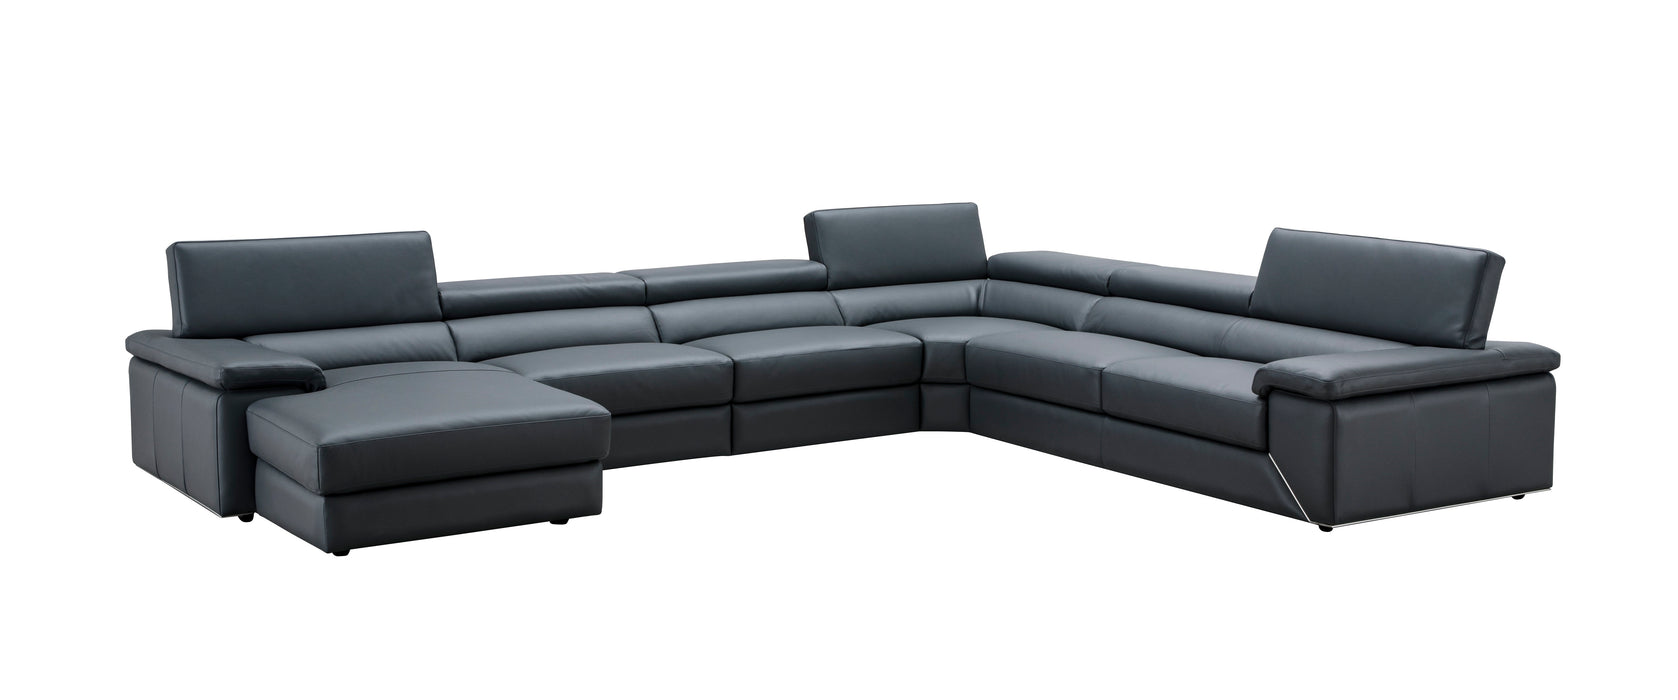 Kobe Leather Sectional 